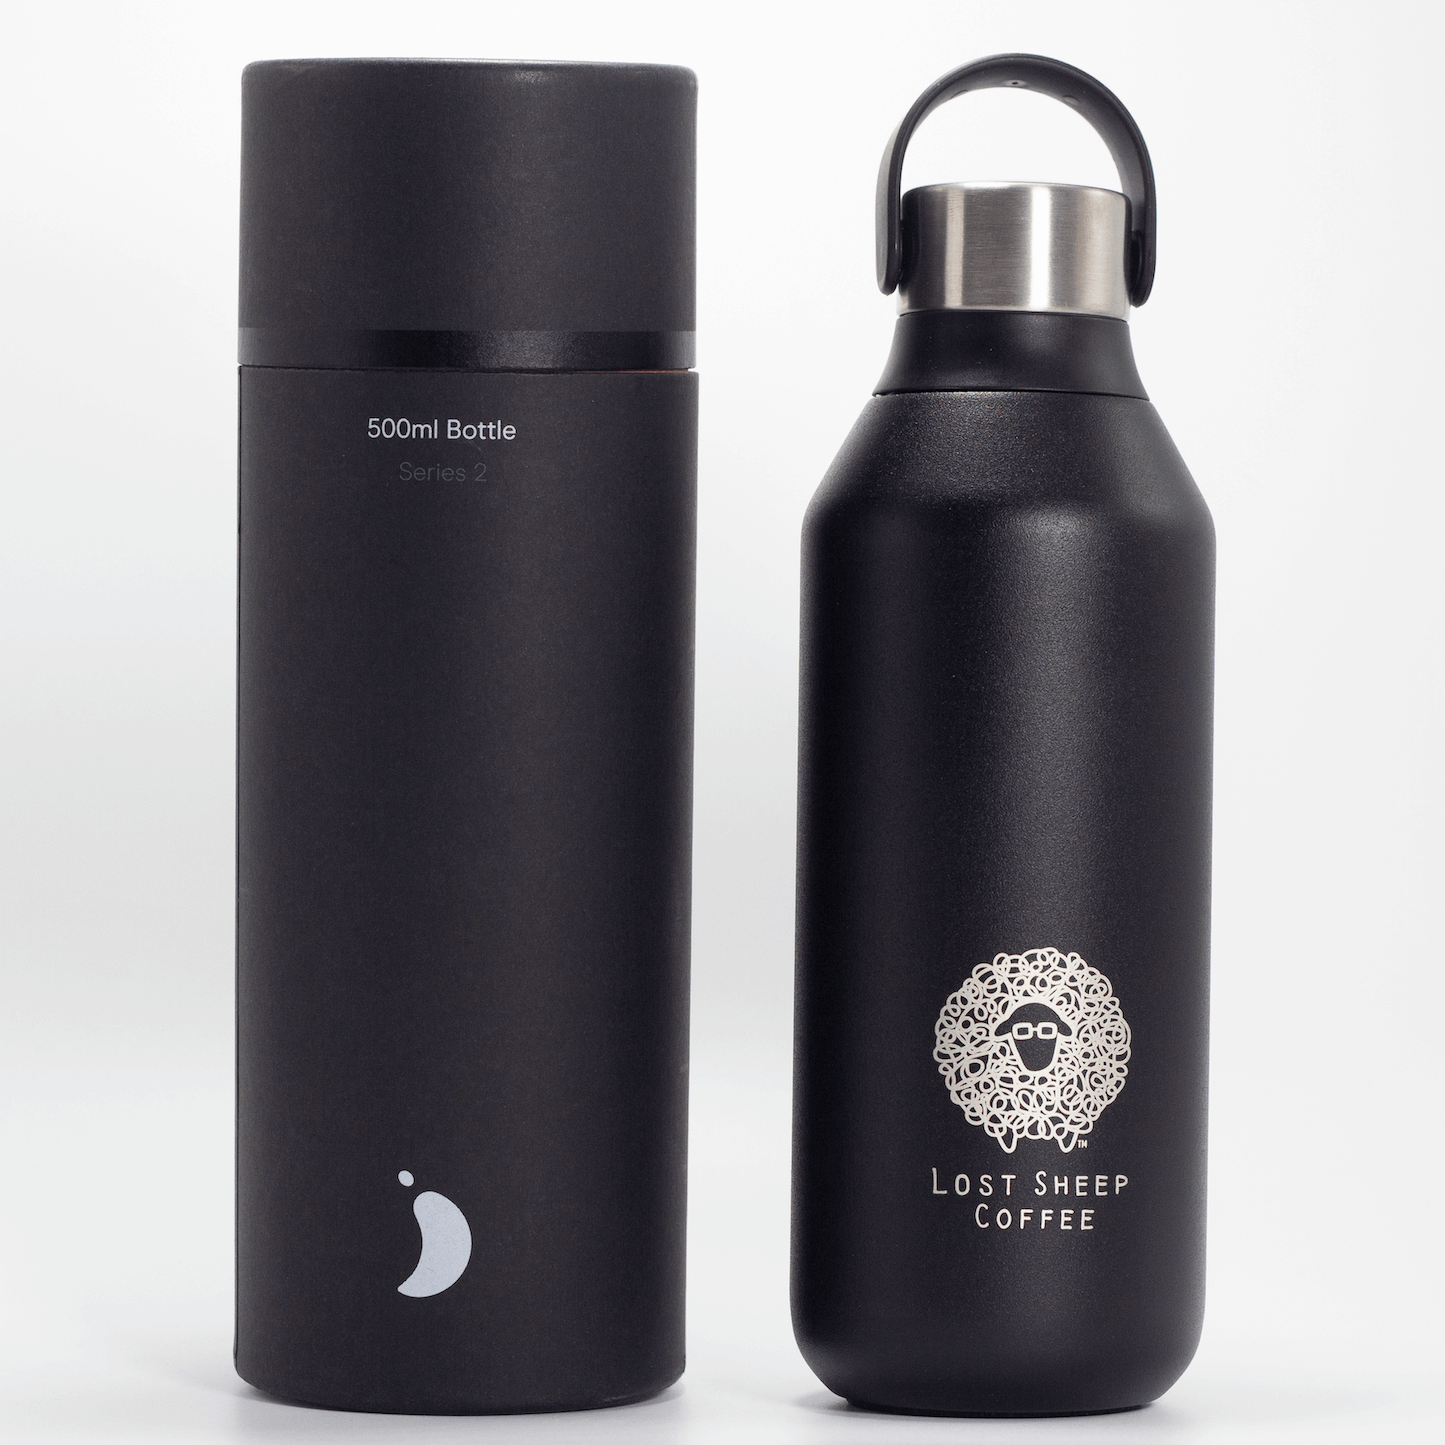 Lost Sheep Coffee x Chilly's Reusable Water Bottle and packaging